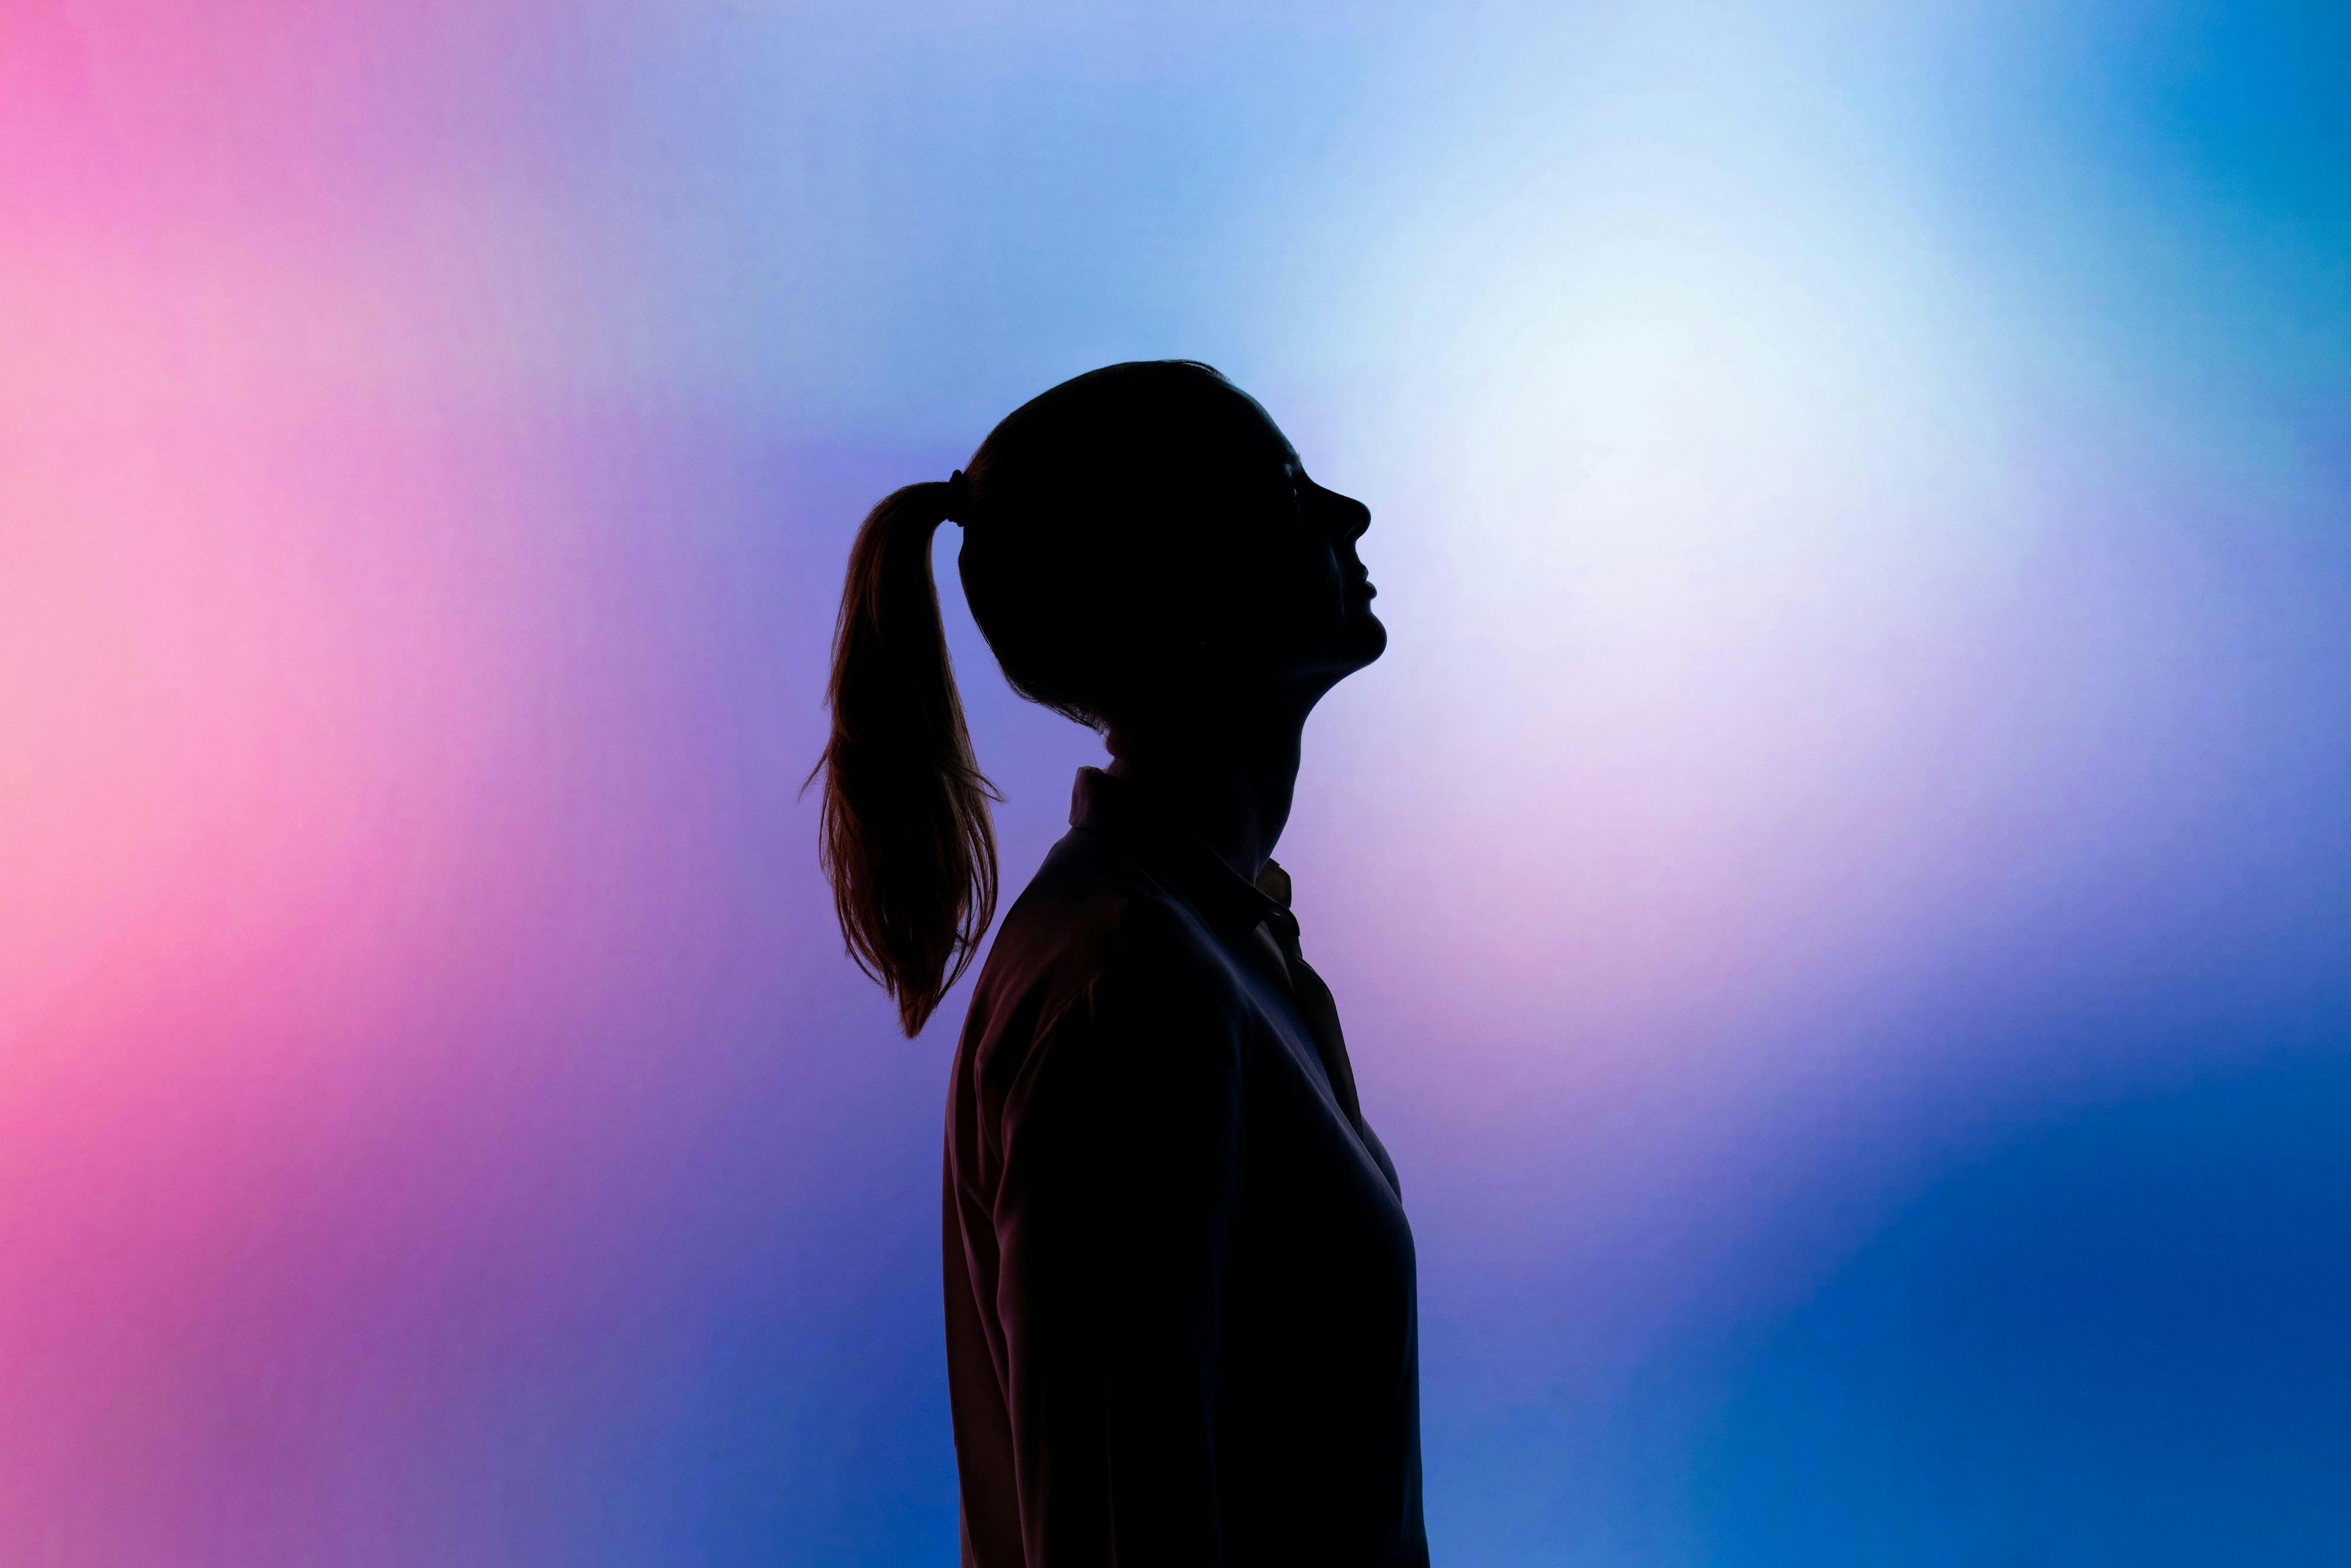 The silhouette of a woman in front of a pink and blue background.